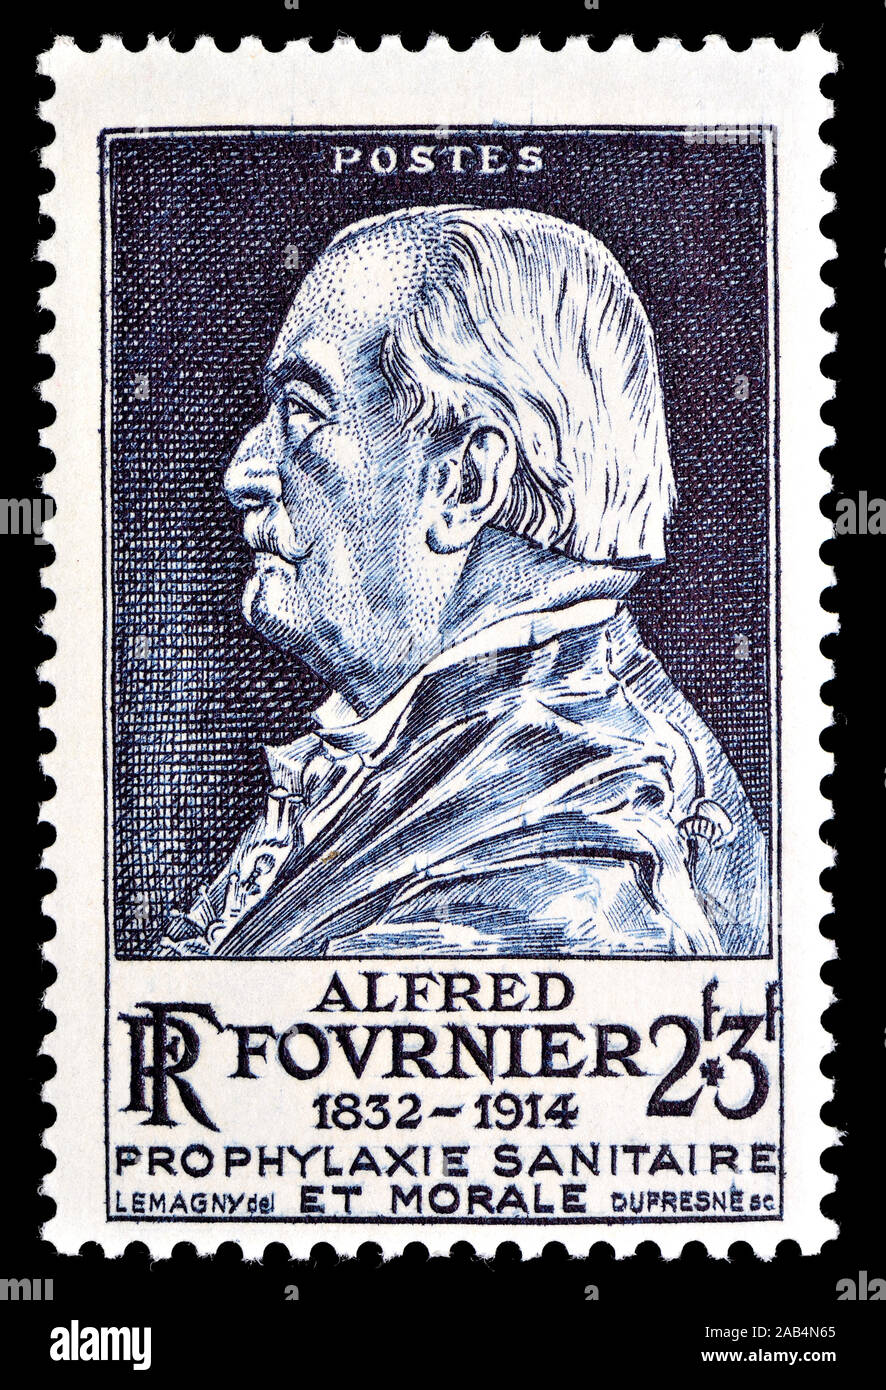 French postage stamp (1947) : Jean Alfred Fournier (1832 – 1914) French dermatologist who specialized in the study of venereal disease. Stock Photo